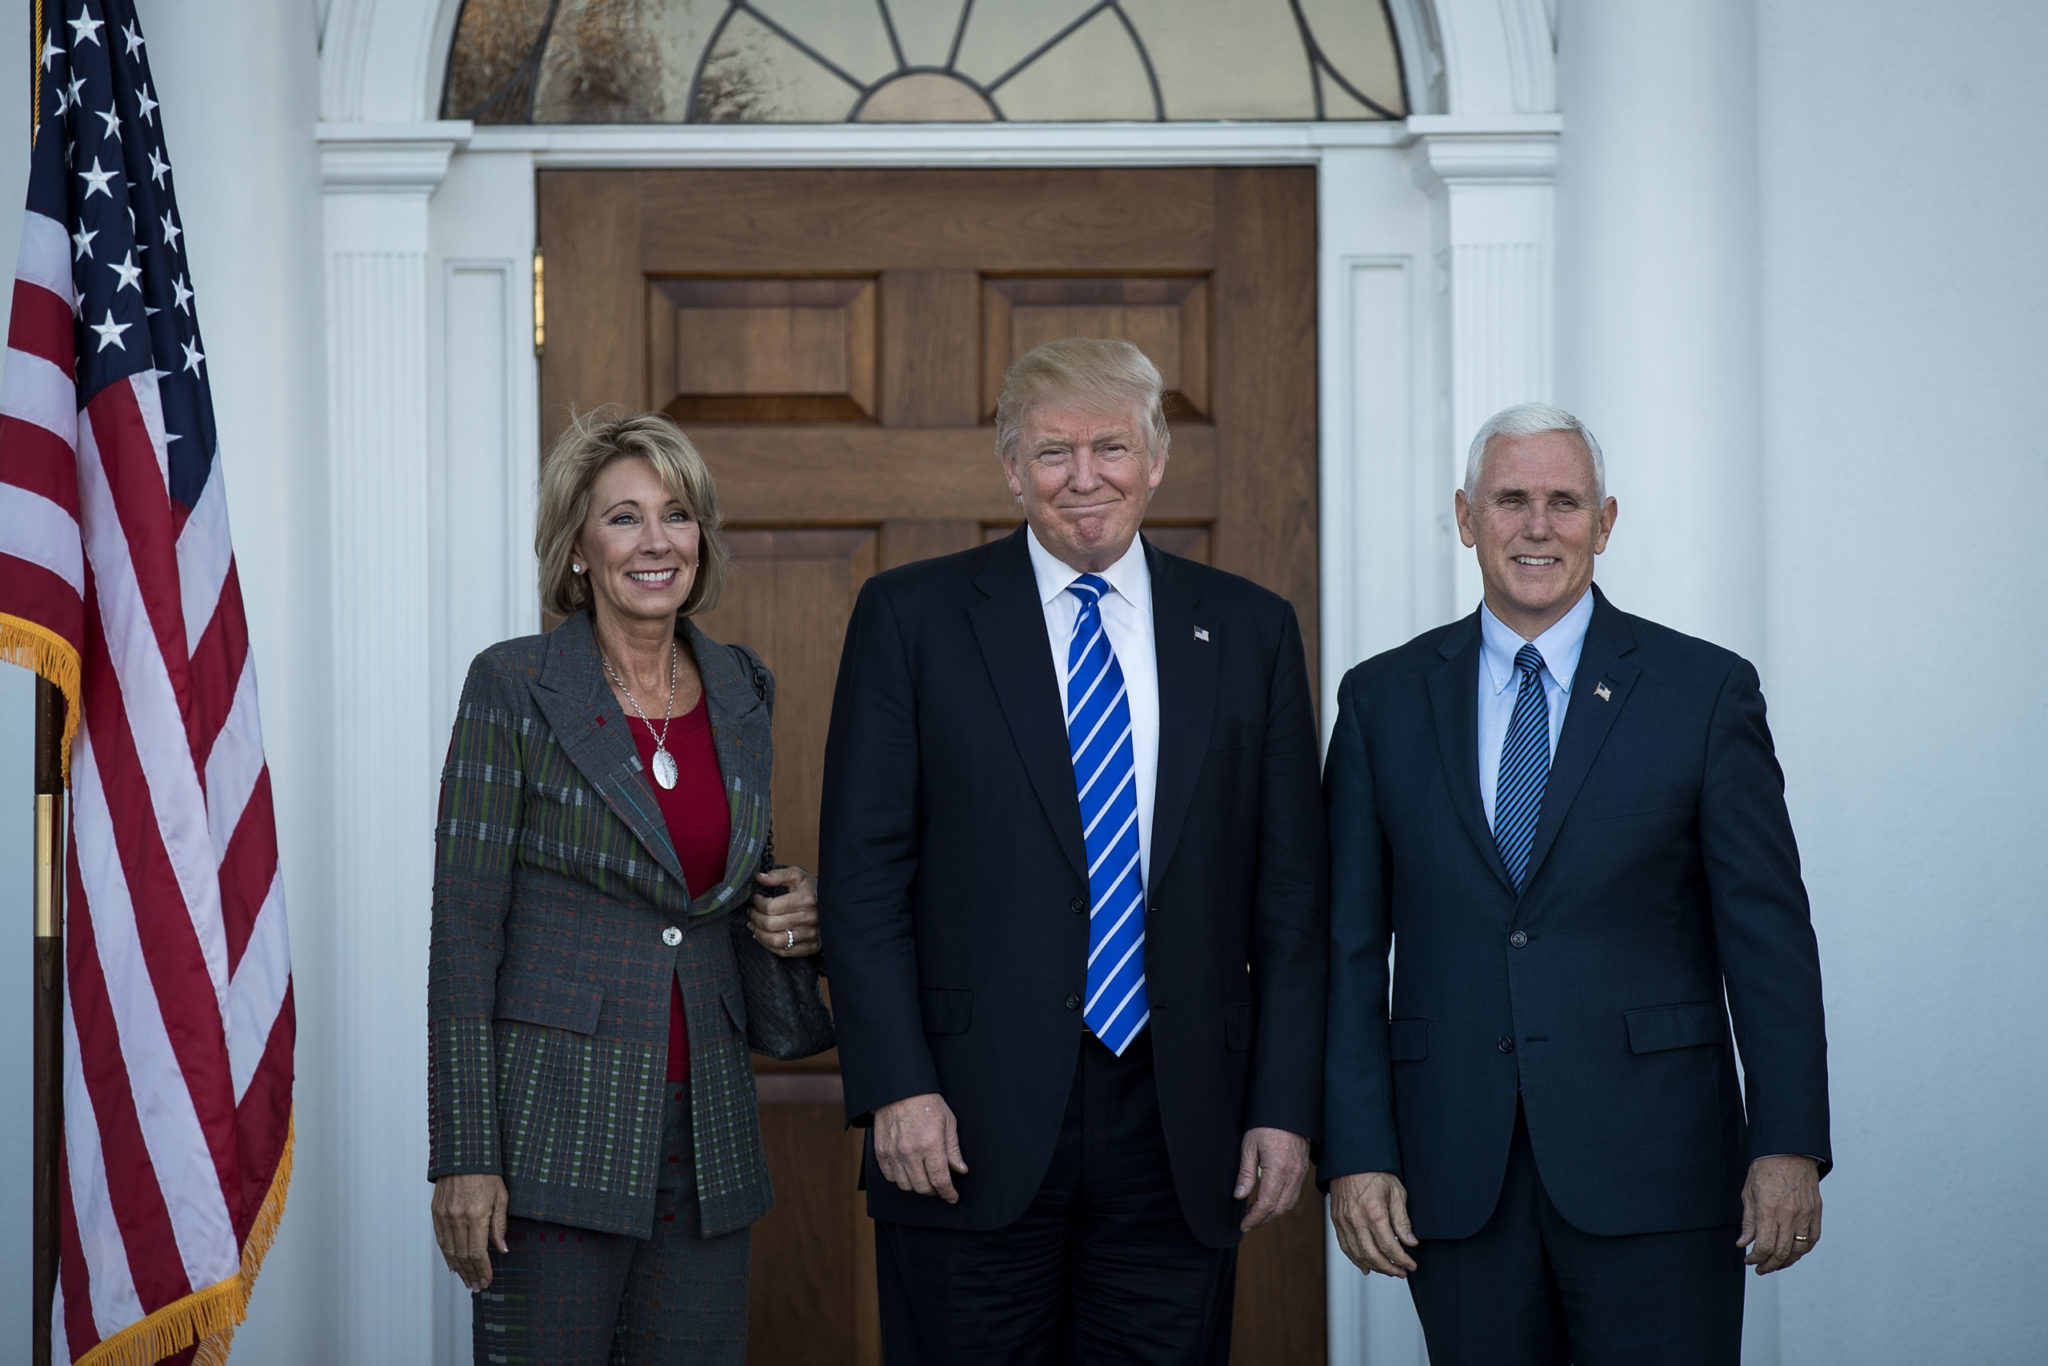 Education Secretary Betsy DeVos poses with Donald Trump and Mike Pence